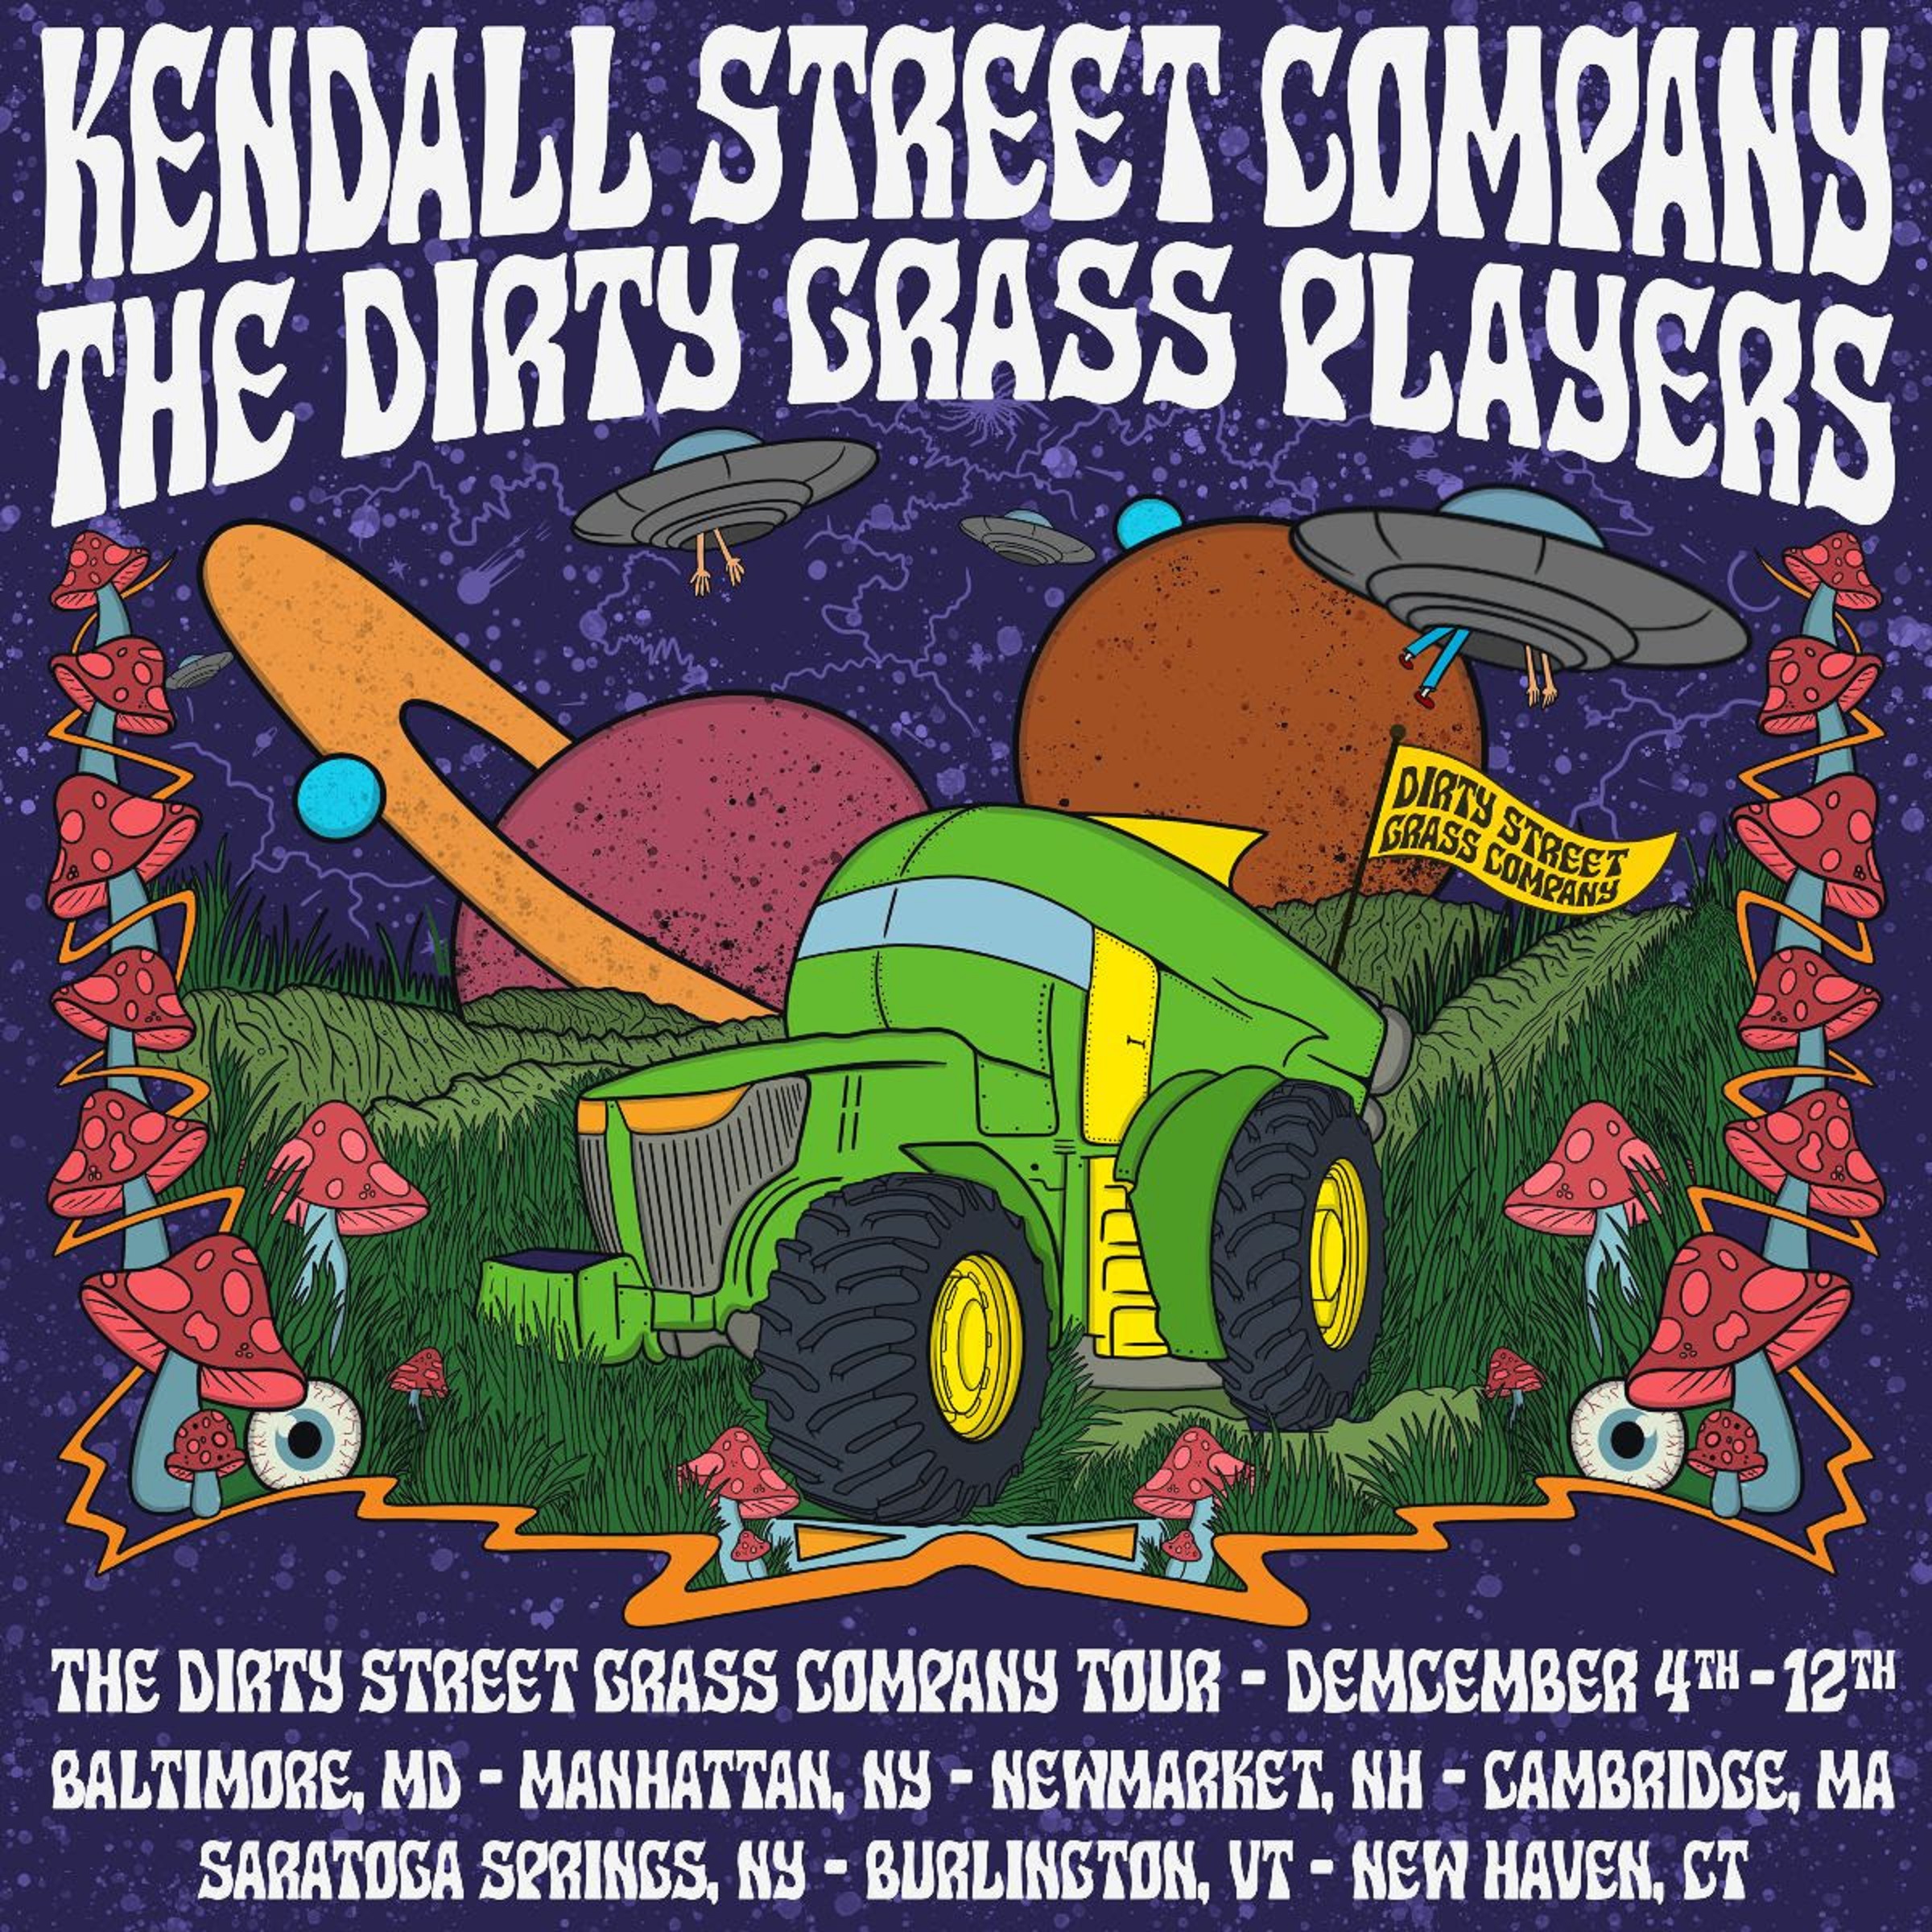 Twiddle drummer Brook Jordan to sit in with "The Dirty Street Grass Company" tonight in VT